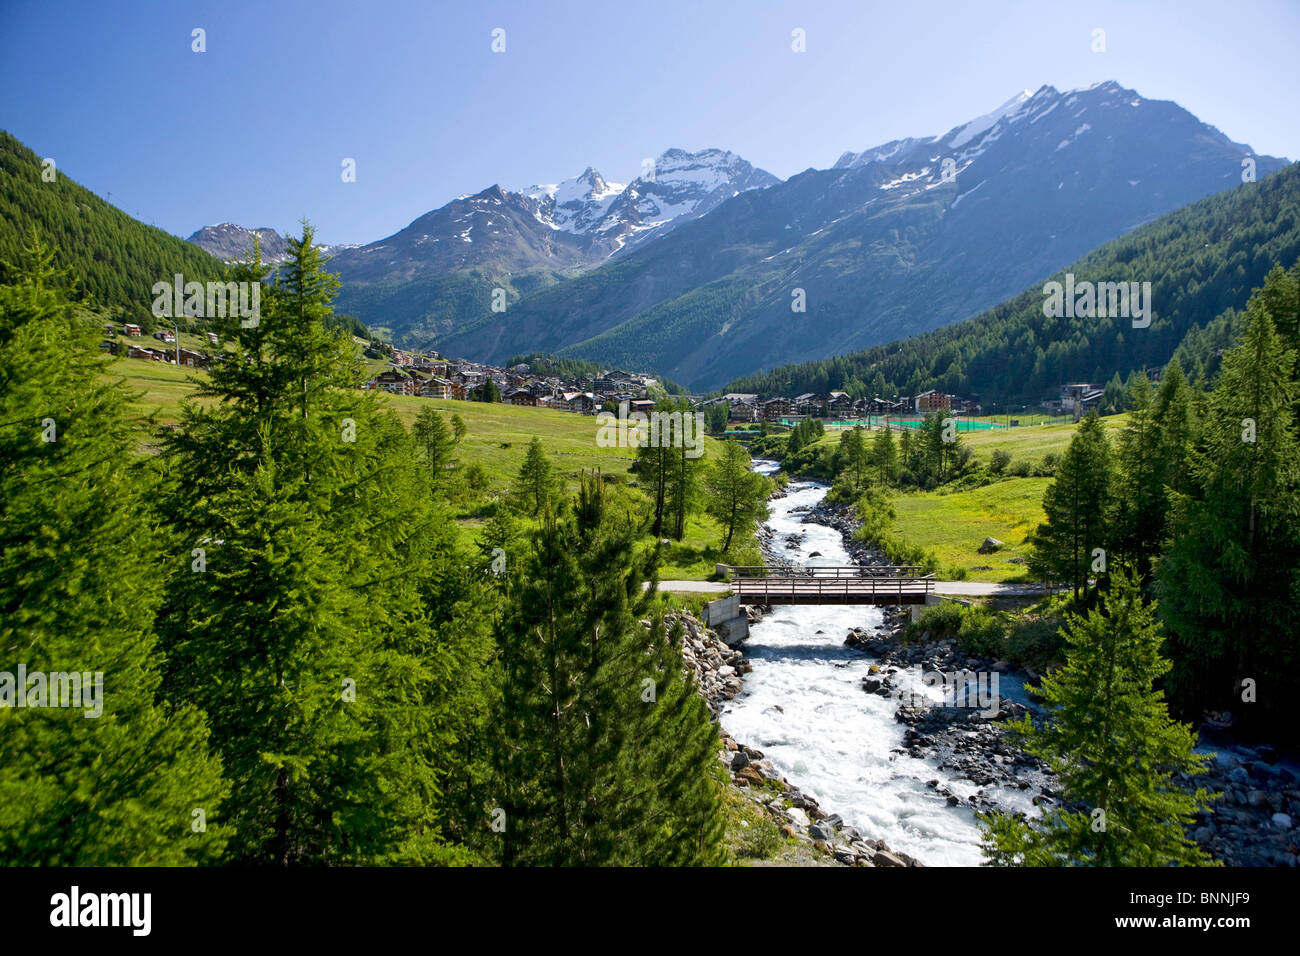 Switzerland swiss scenery Saas Fee valley of Saas Saastal canton Valais mountains nature wood forest trees river flow Saaser Stock Photo